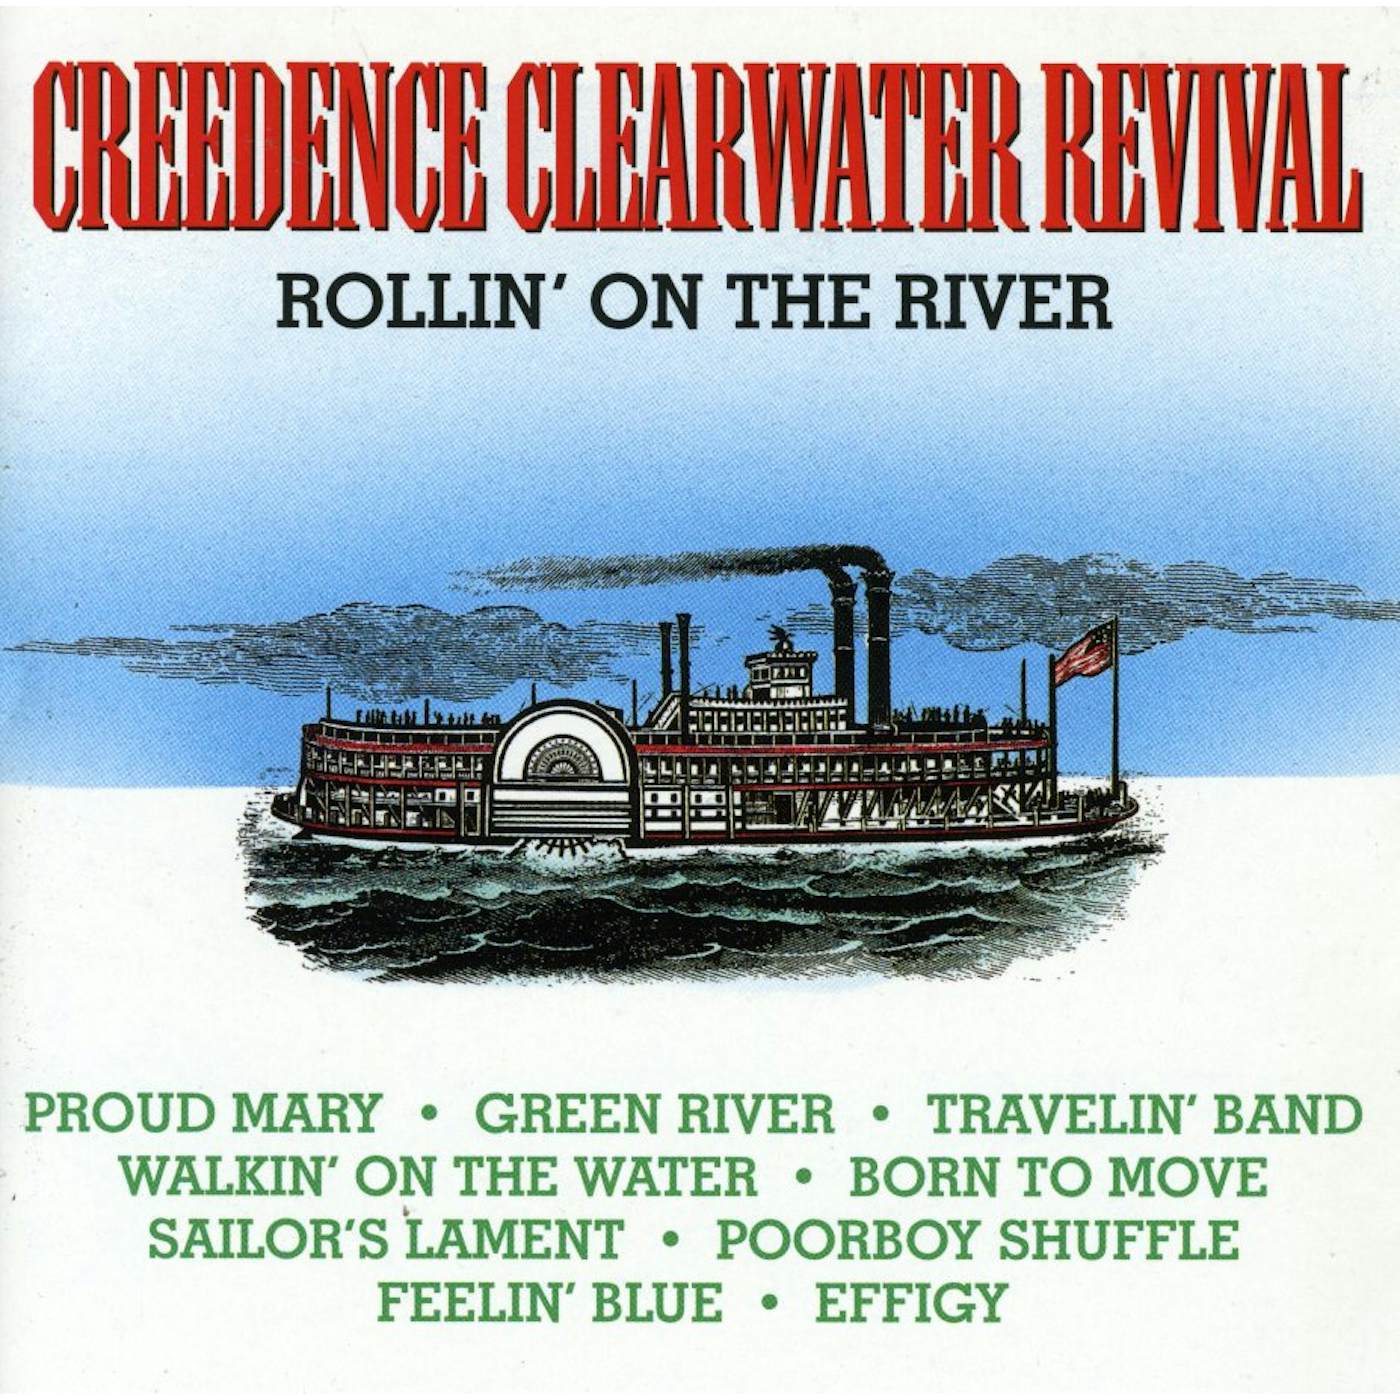 Creedence Clearwater Revival ROLLIN ON THE RIVER CD